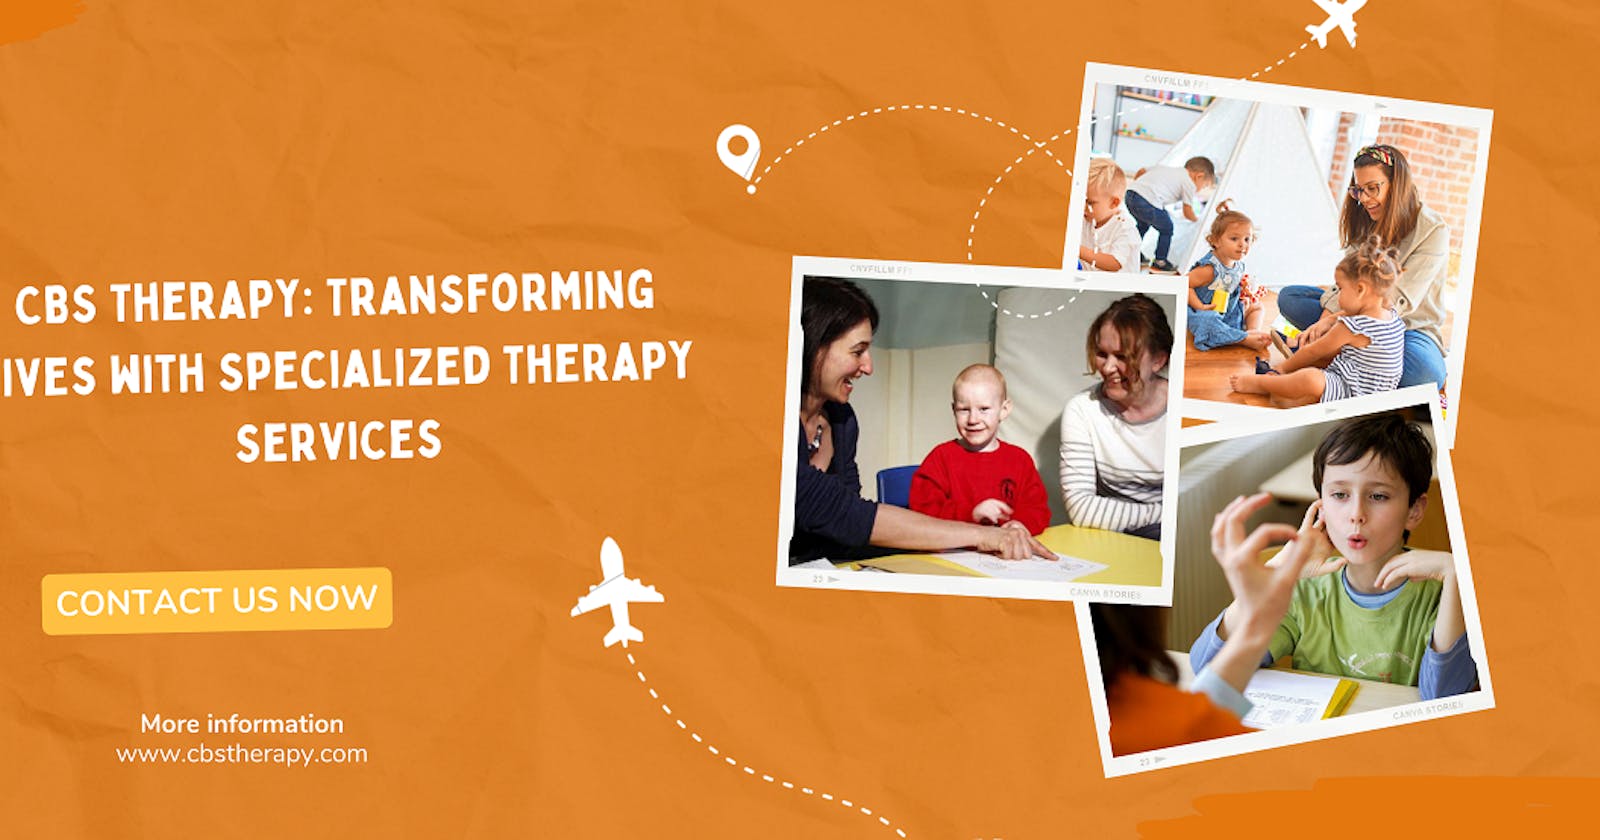 CBS Therapy: Transforming Lives with Specialized Therapy Services